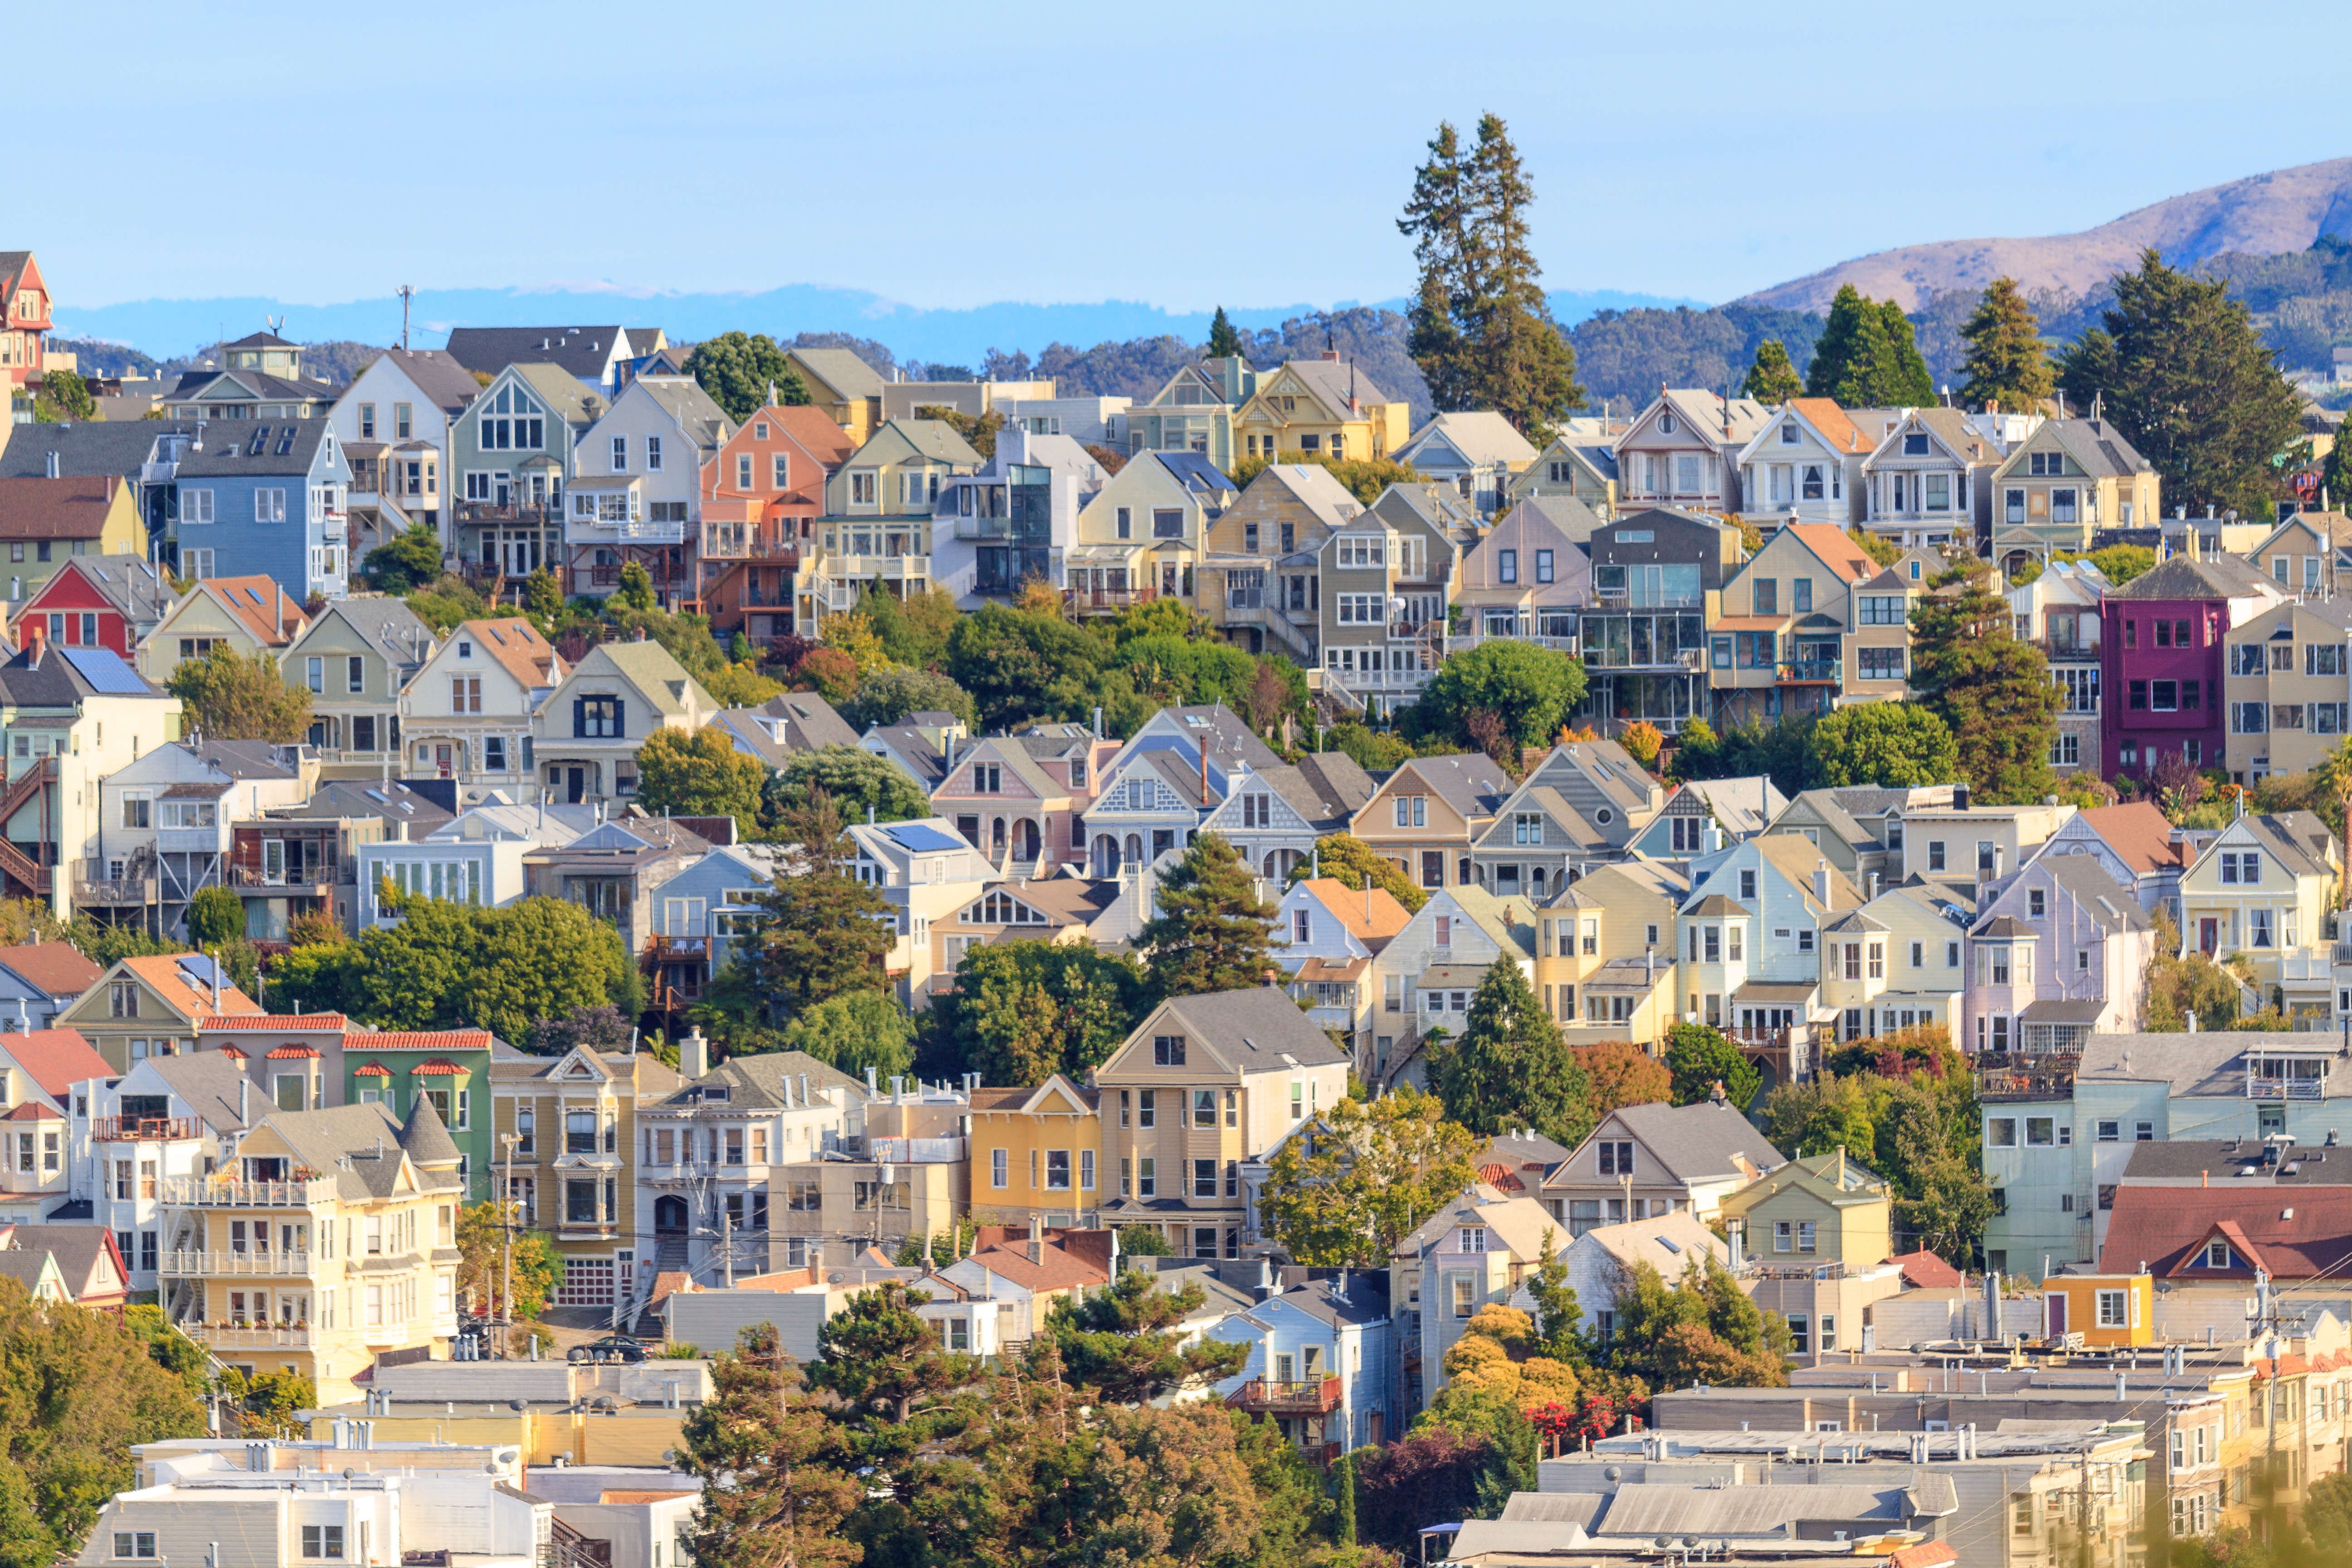 Homes in the Bay Area real estate market